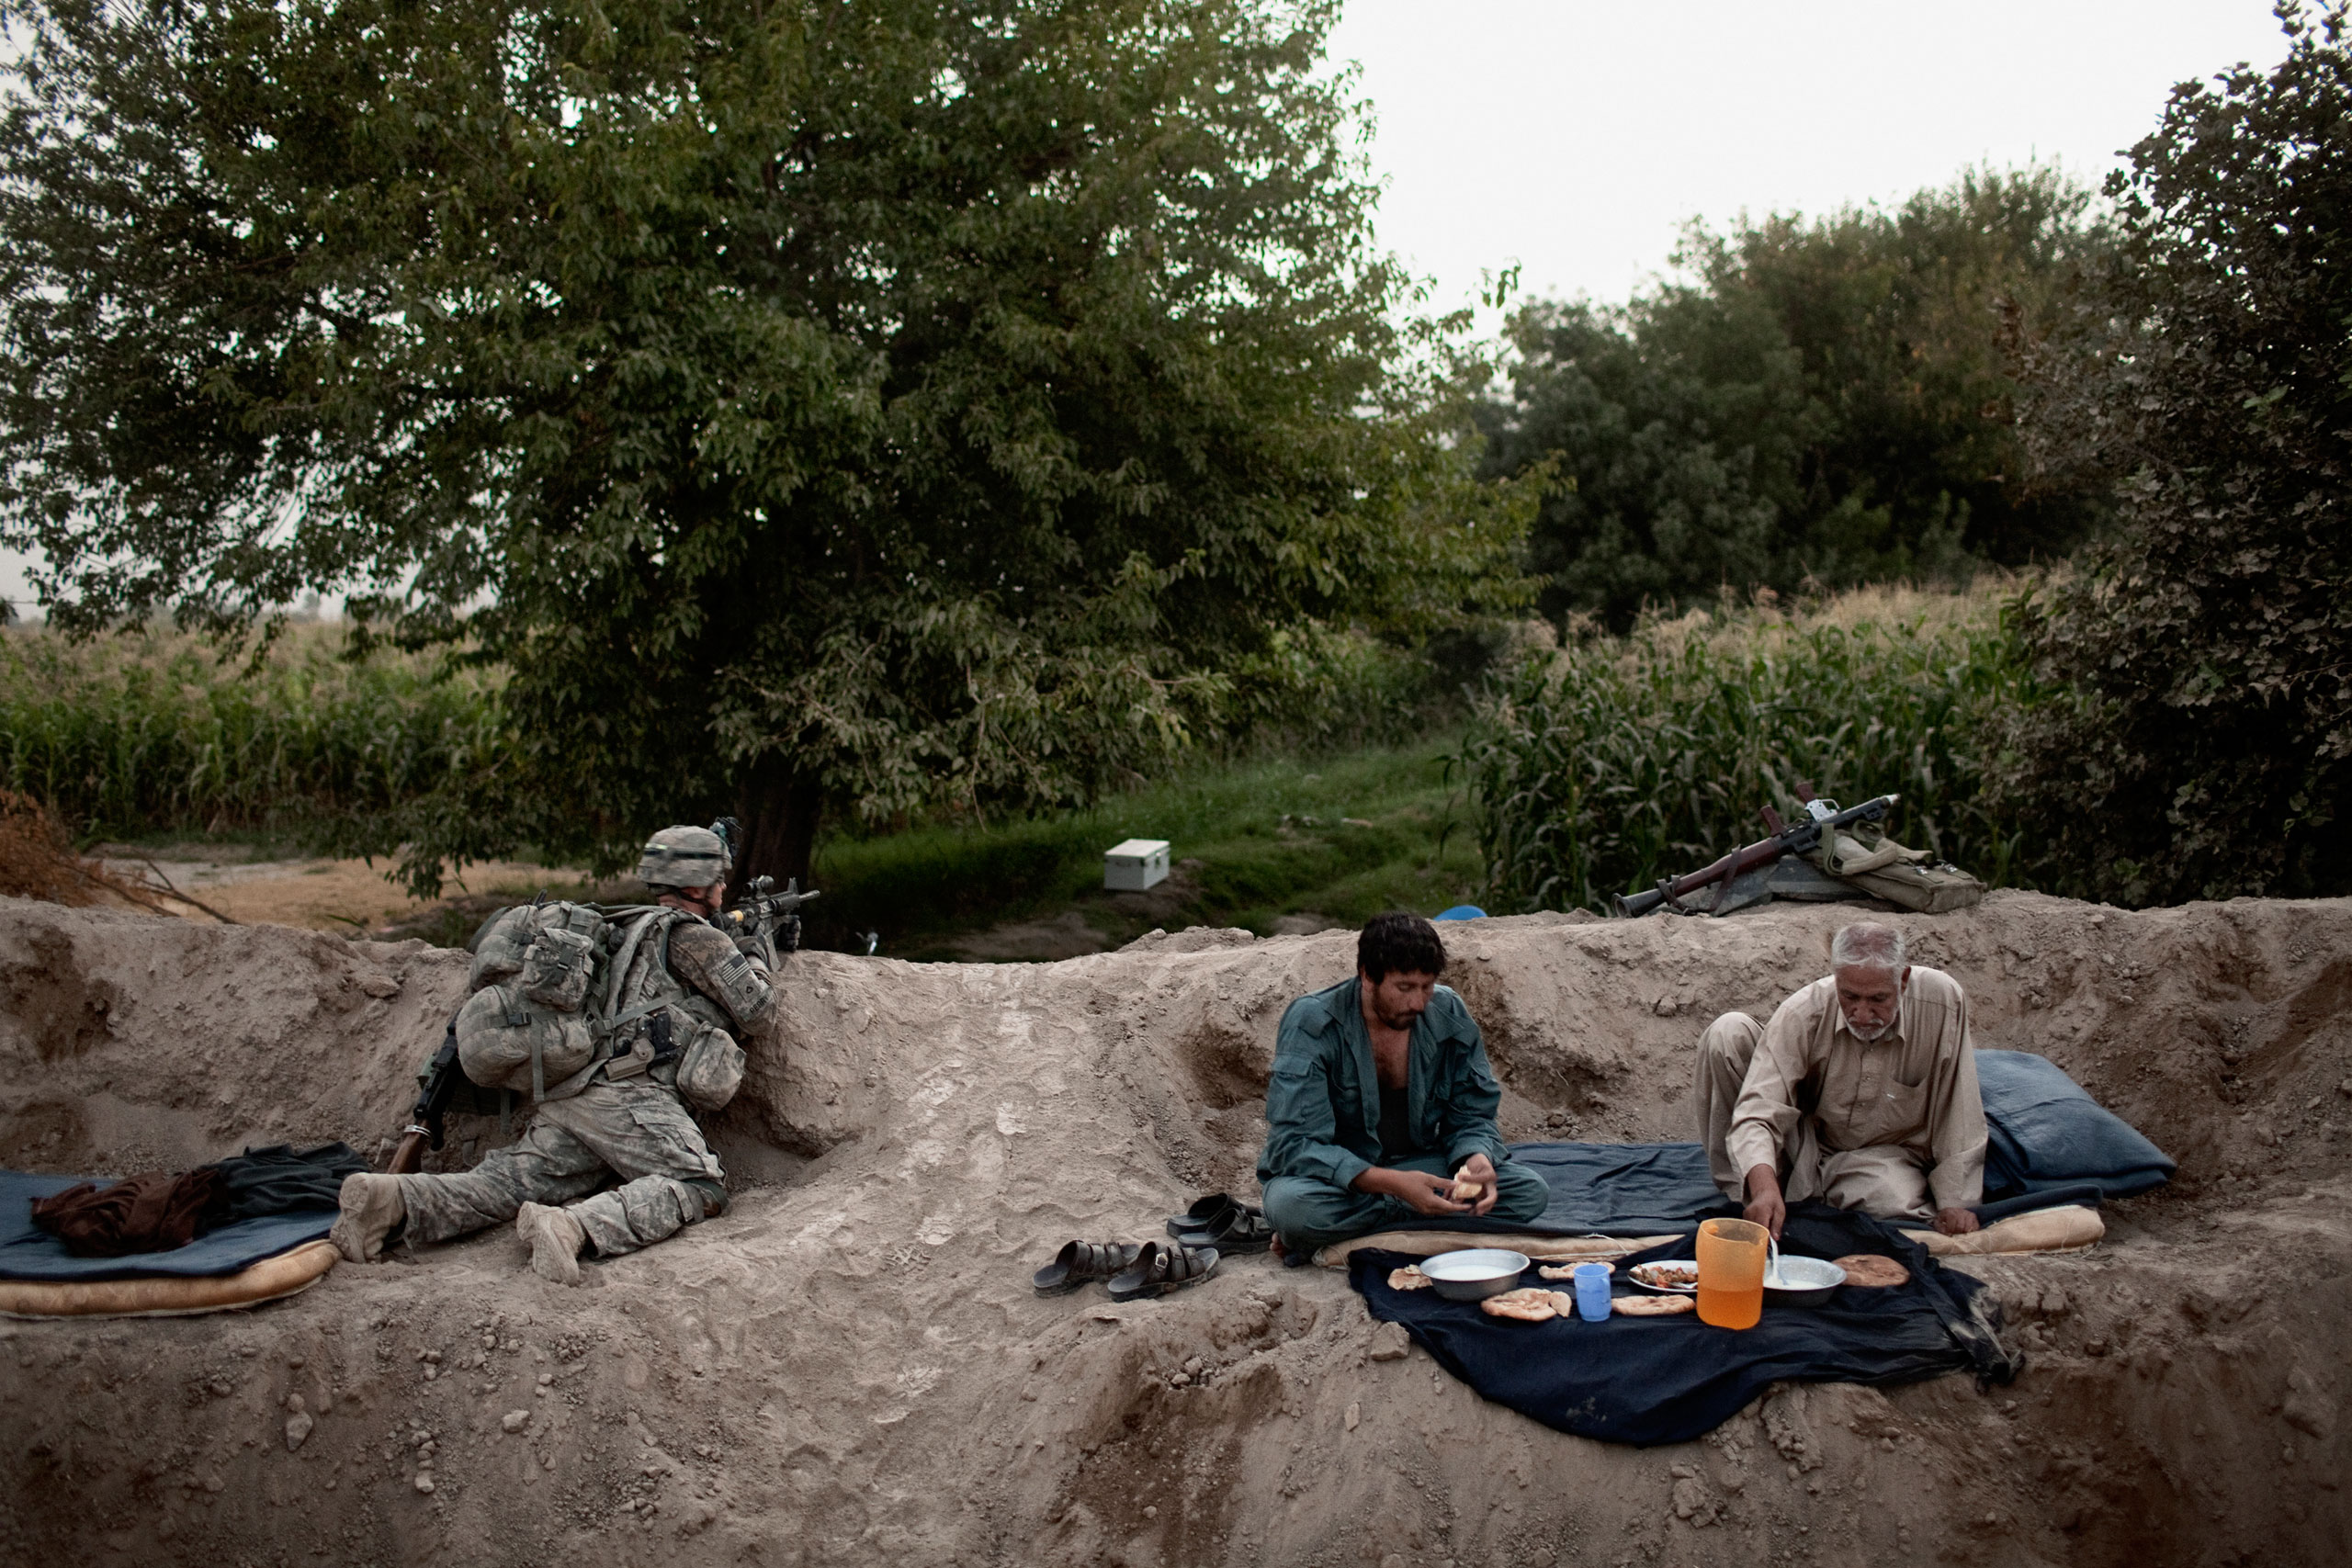 Afghan National Police broke their fast for Iftar during Ramadan while a soldier from the 504th U.S. Military Police Battalion provided security in the Mehlajat area of Kandahar City, Afghanistan, 2010.